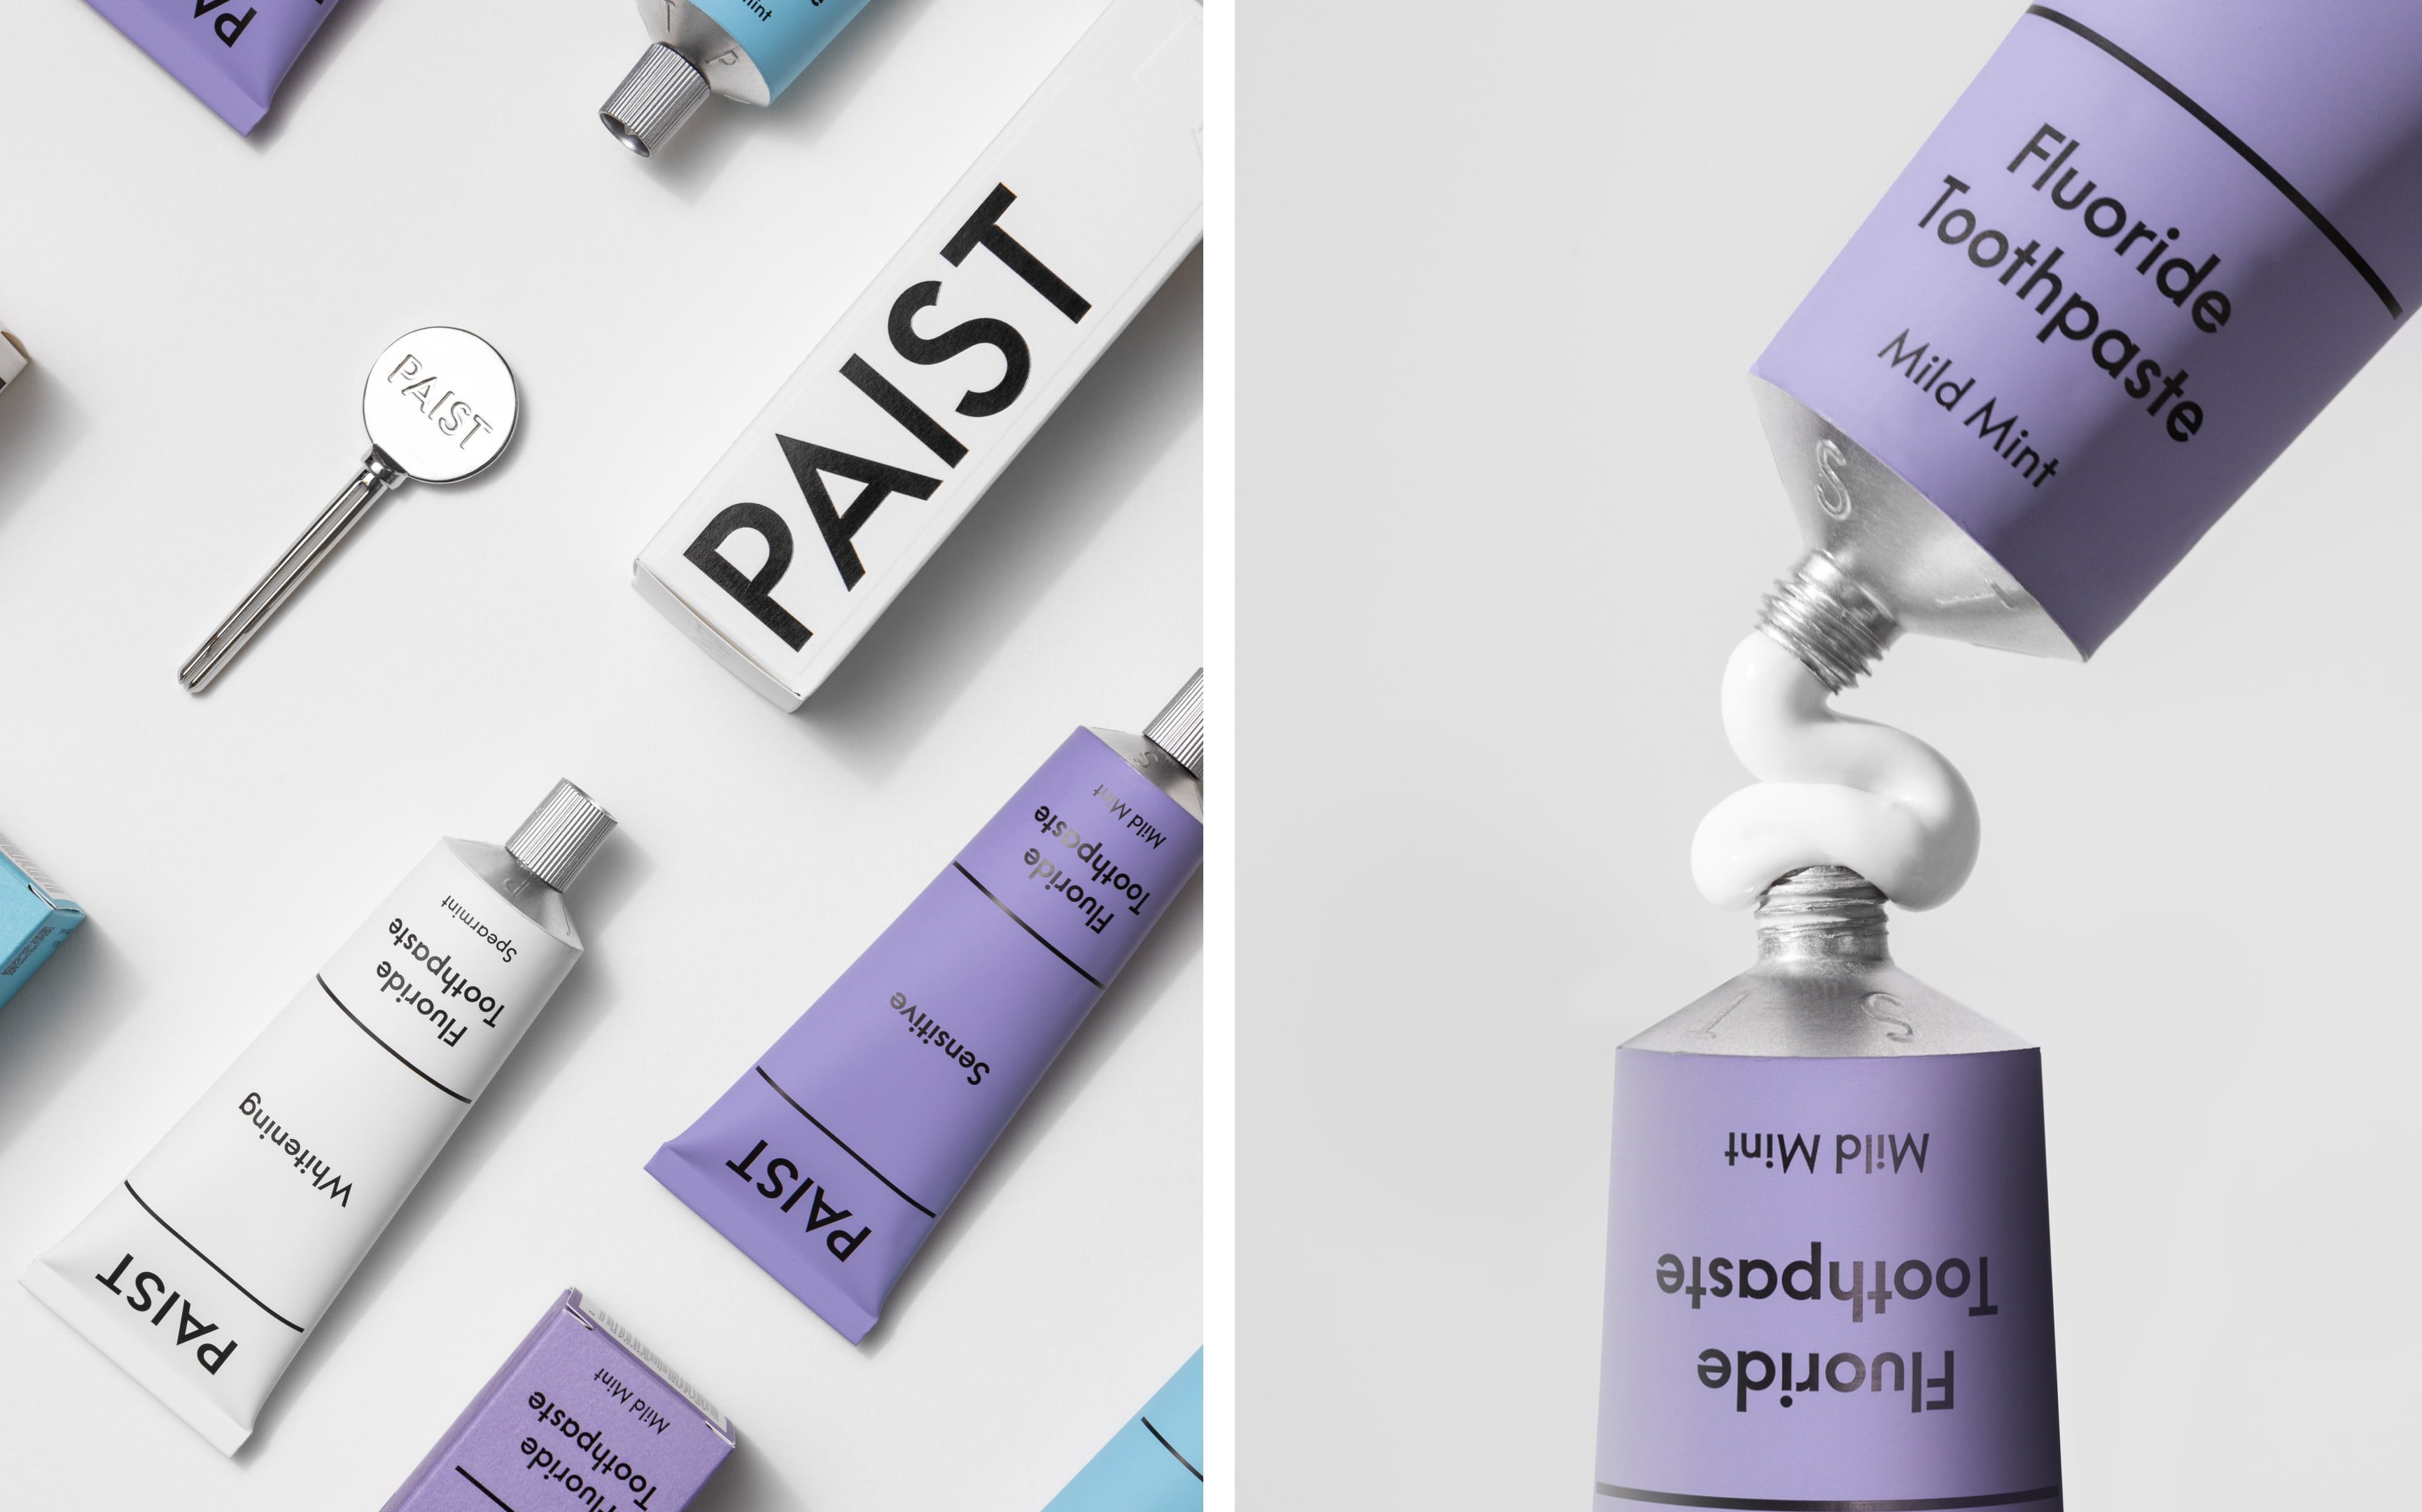 Branding, packaging, motion graphics and website for disruptive toothpaste brand PAIST designed by Two Times Elliott. 